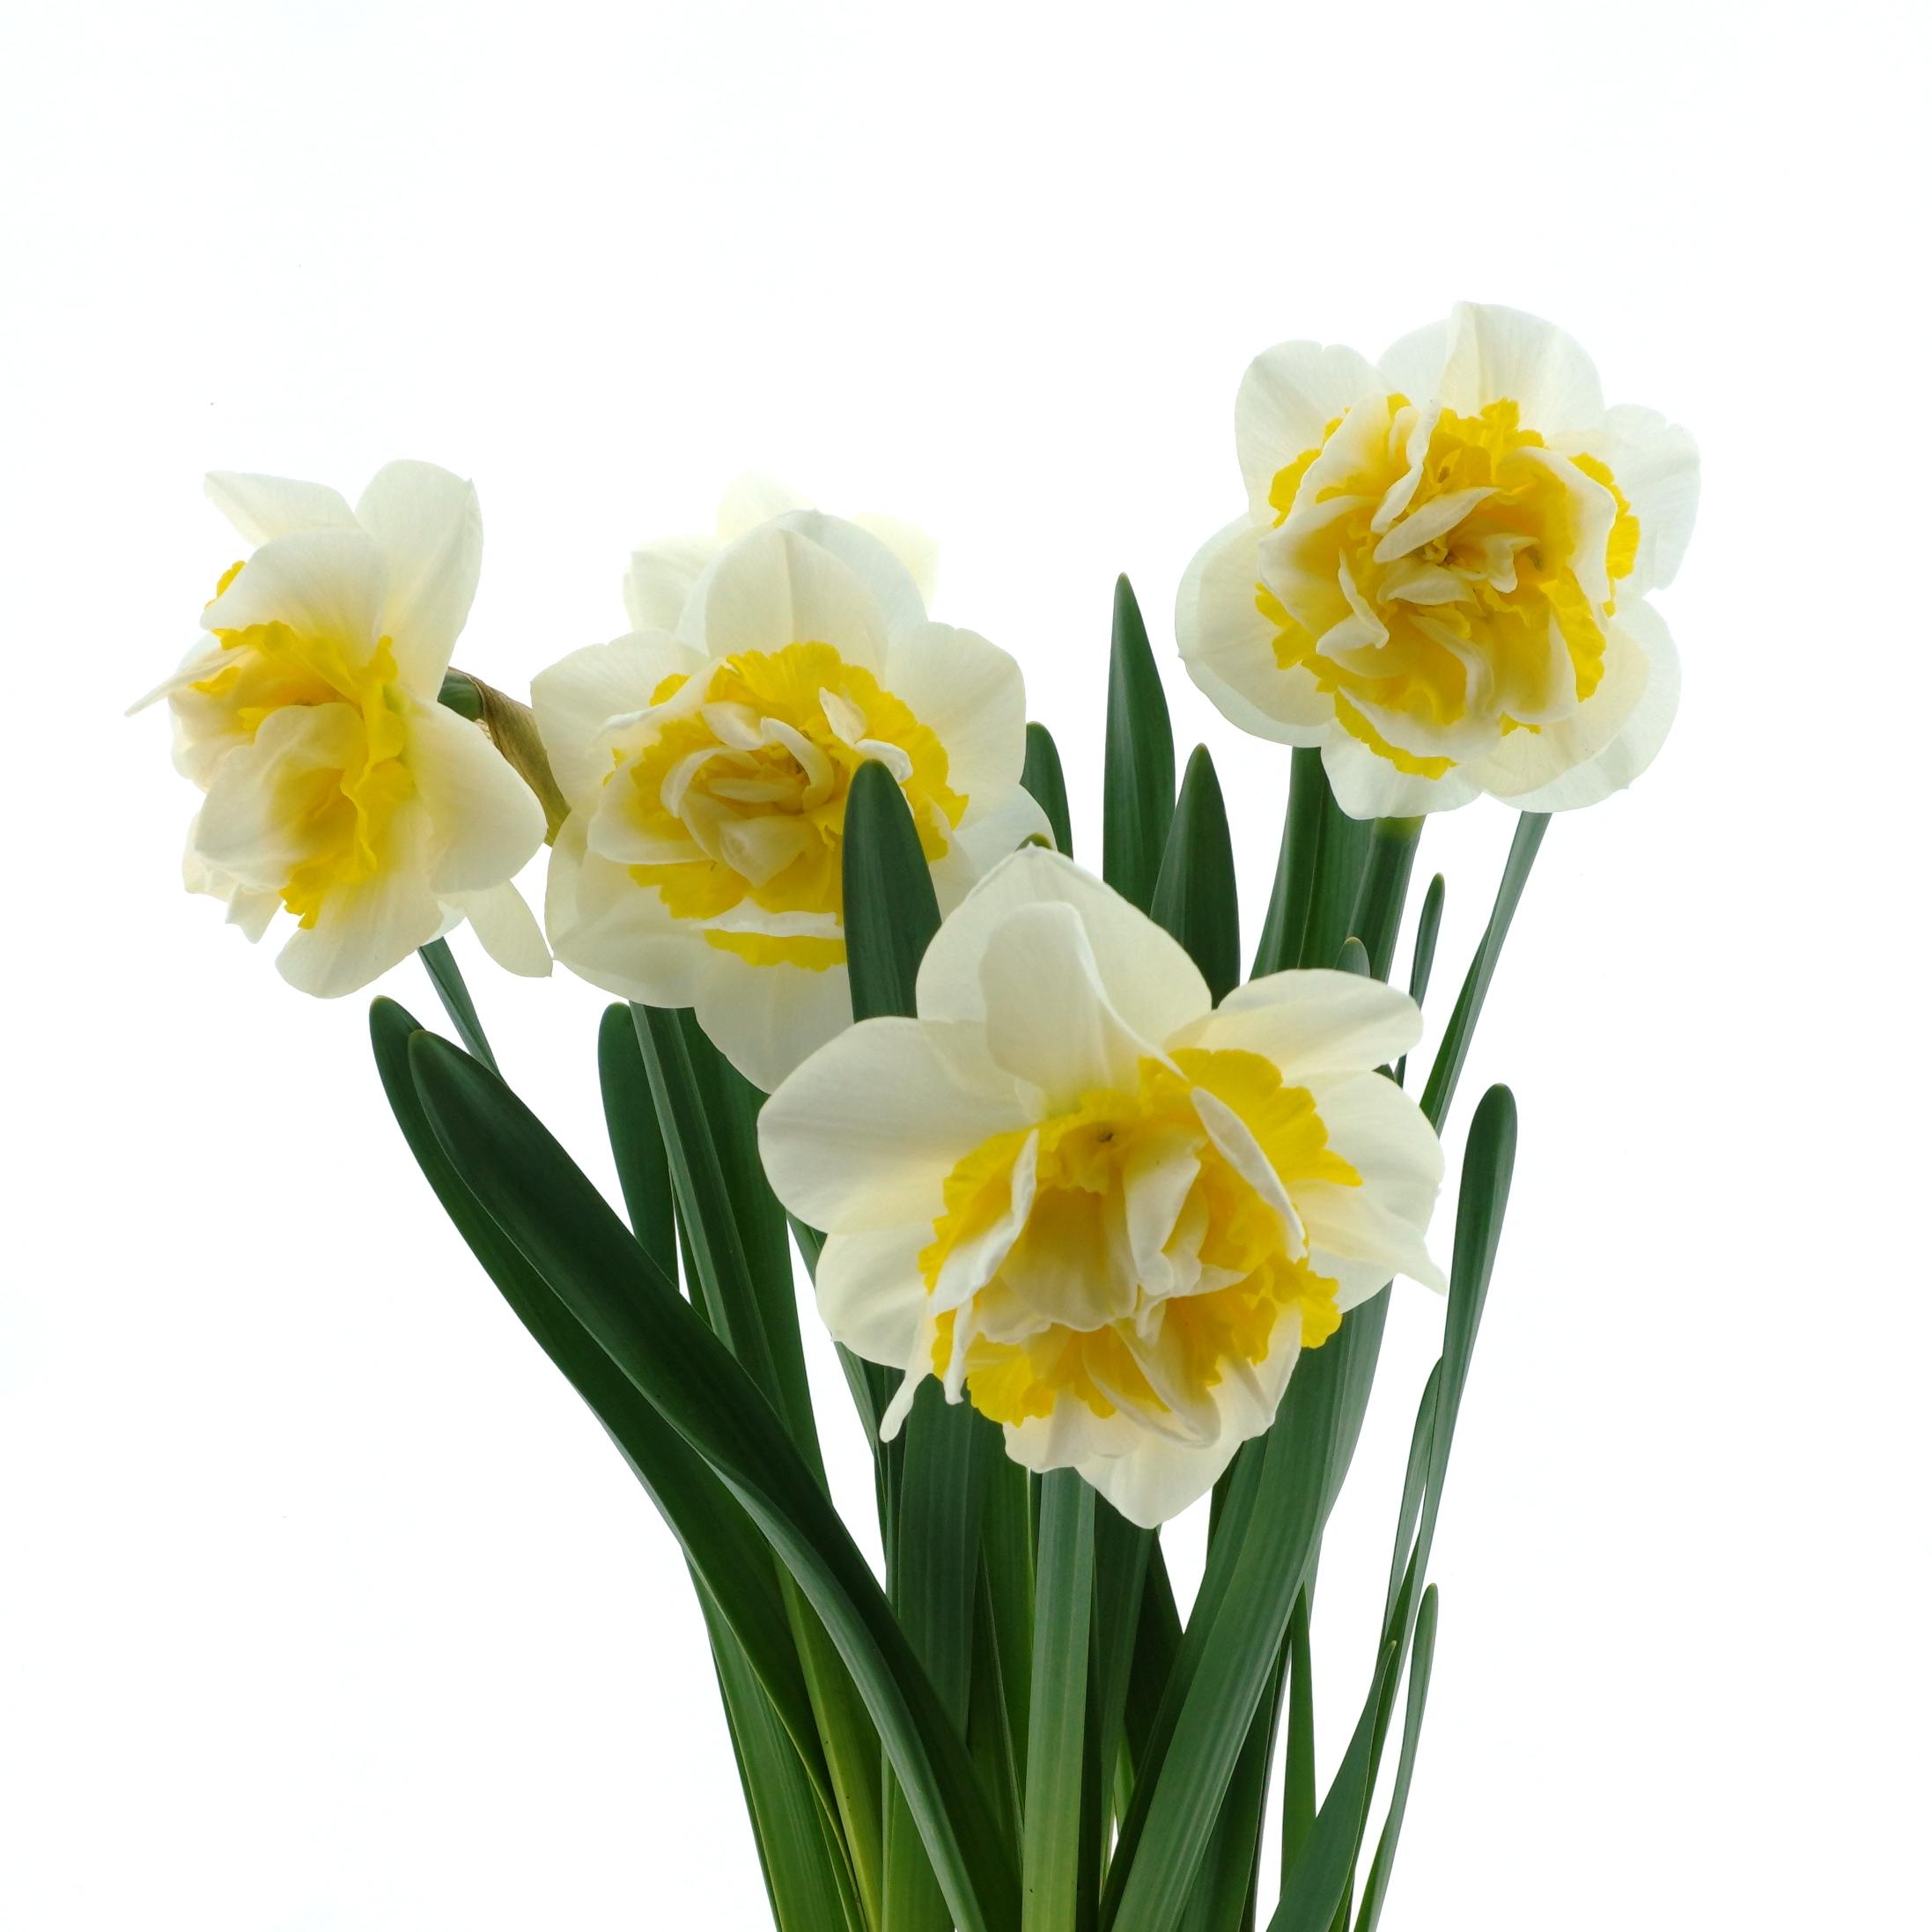 Daffodil Double 'Double Pam' - Coming Soon for Fall 2024 from Leo Berbee Bulb Company